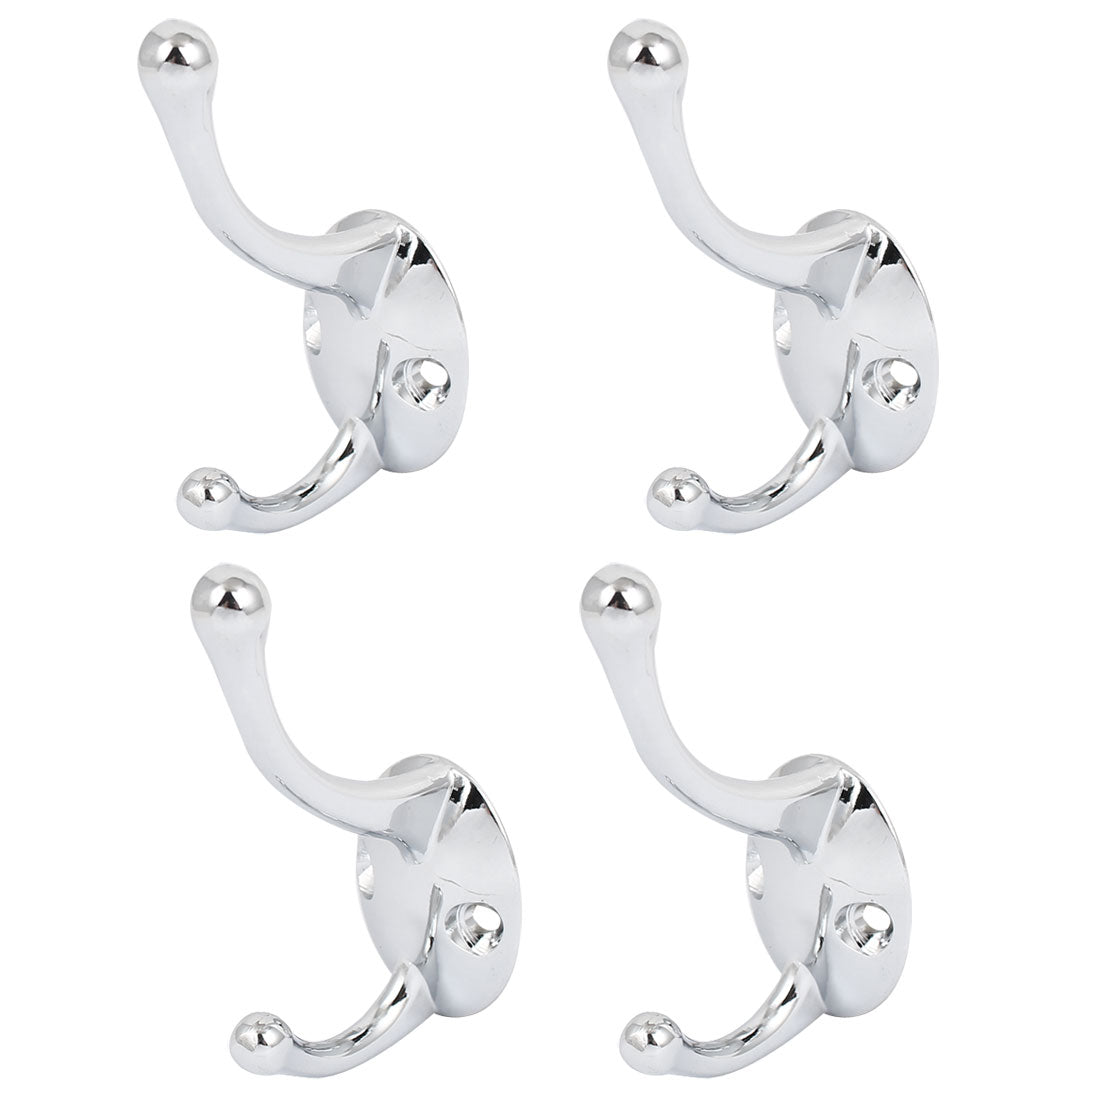 uxcell Uxcell Wall Mount Chrome Finished Double Hooks Hanger 4 Pcs for Hat Coat Clothes Towel